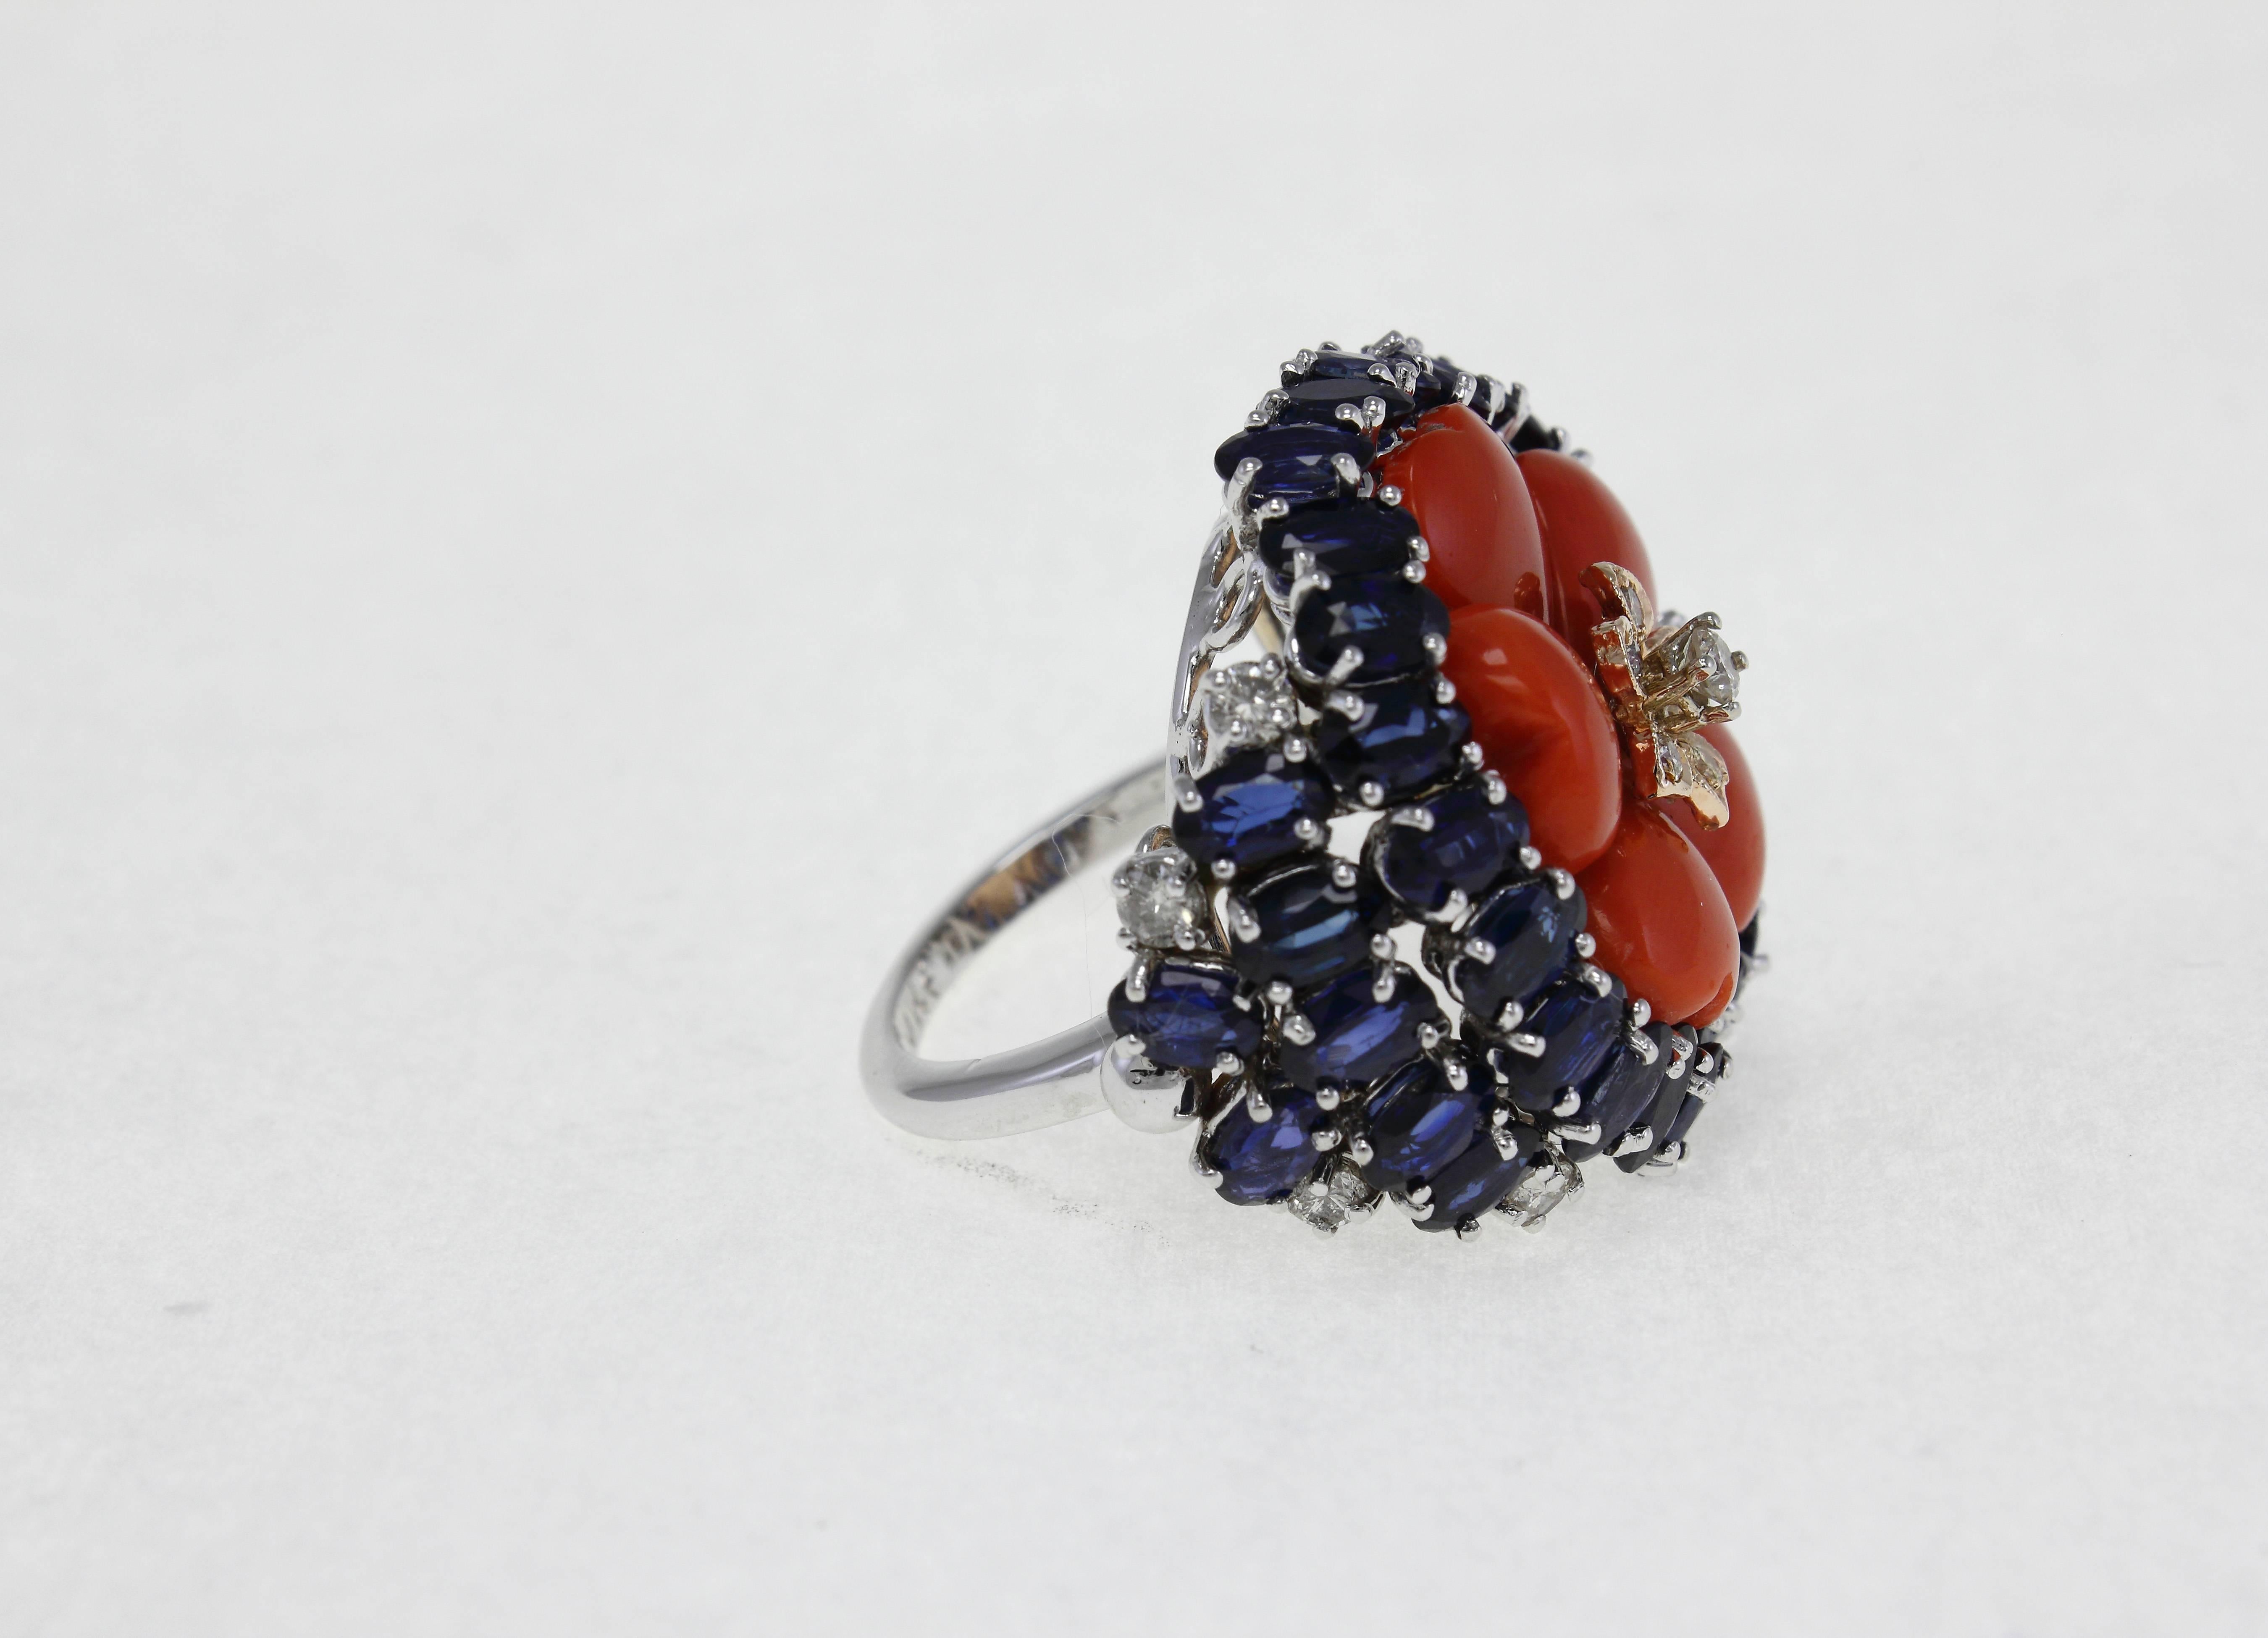 Amazing ring in 14Kt white gold composed of a flower shaped coral with central diamonds surrounded by a crown of sapphire.
diamonds 0.94 kt
sapphire 13.36 kt
coral 1.60gr
tot weight 18.2 ref,occu
